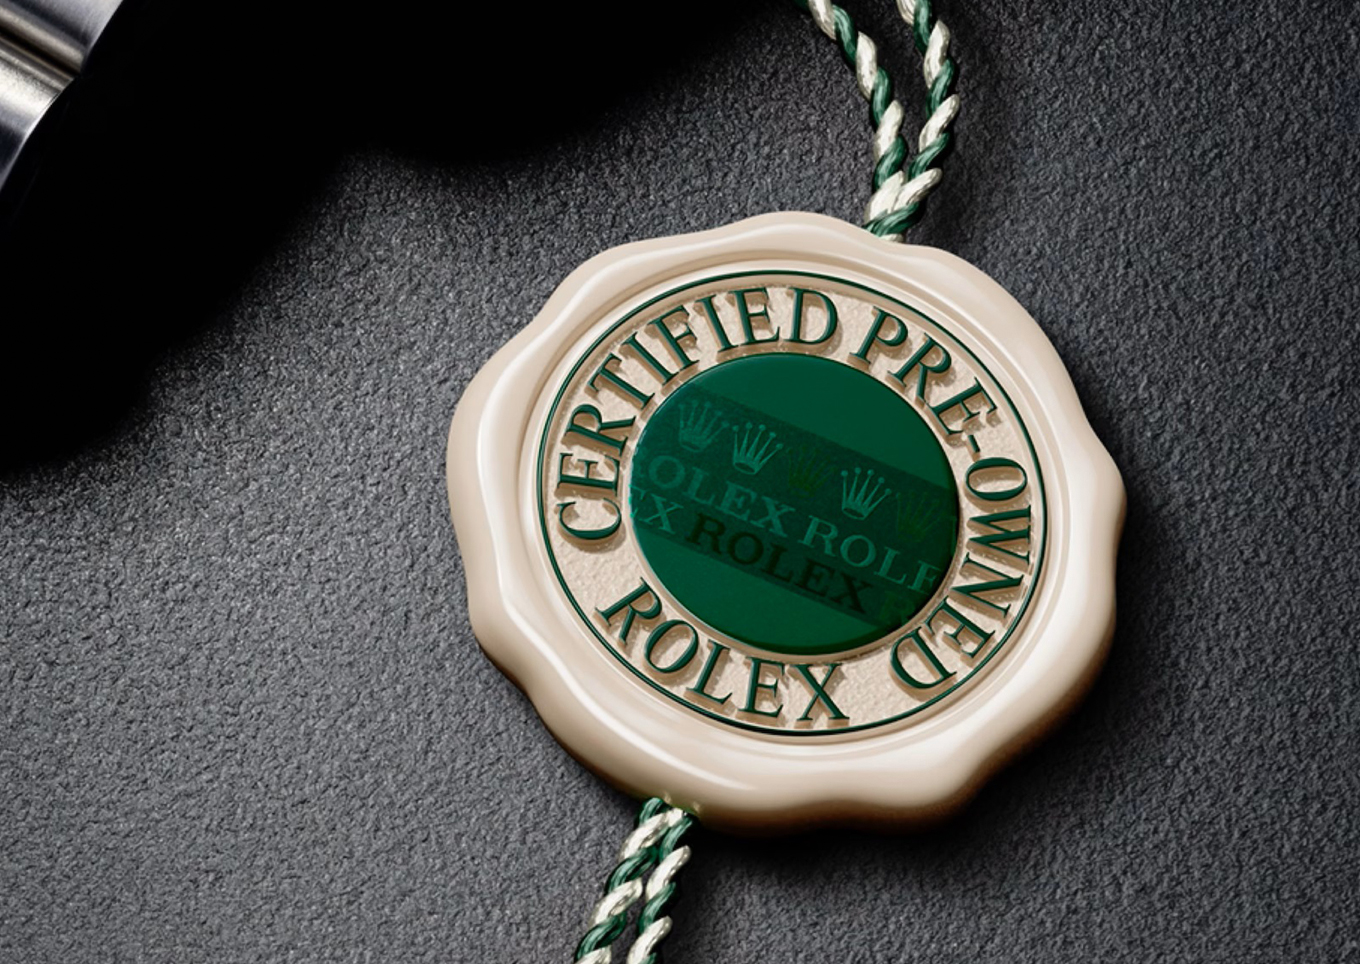 Pre-owned Rolex watches